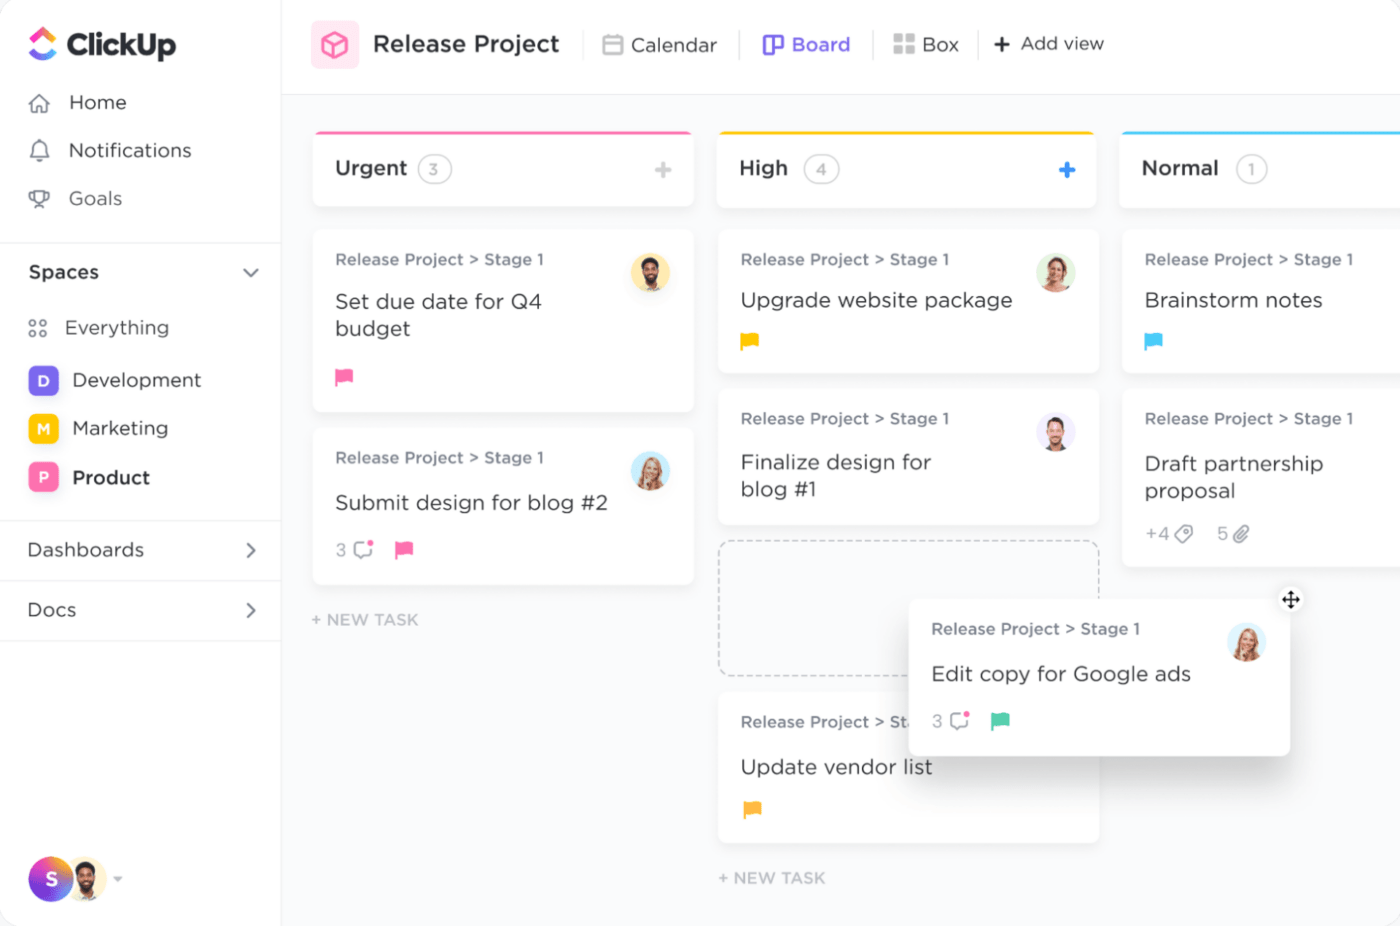 clickup's kanban board view is the solution for remote teams to build their kanban workflow